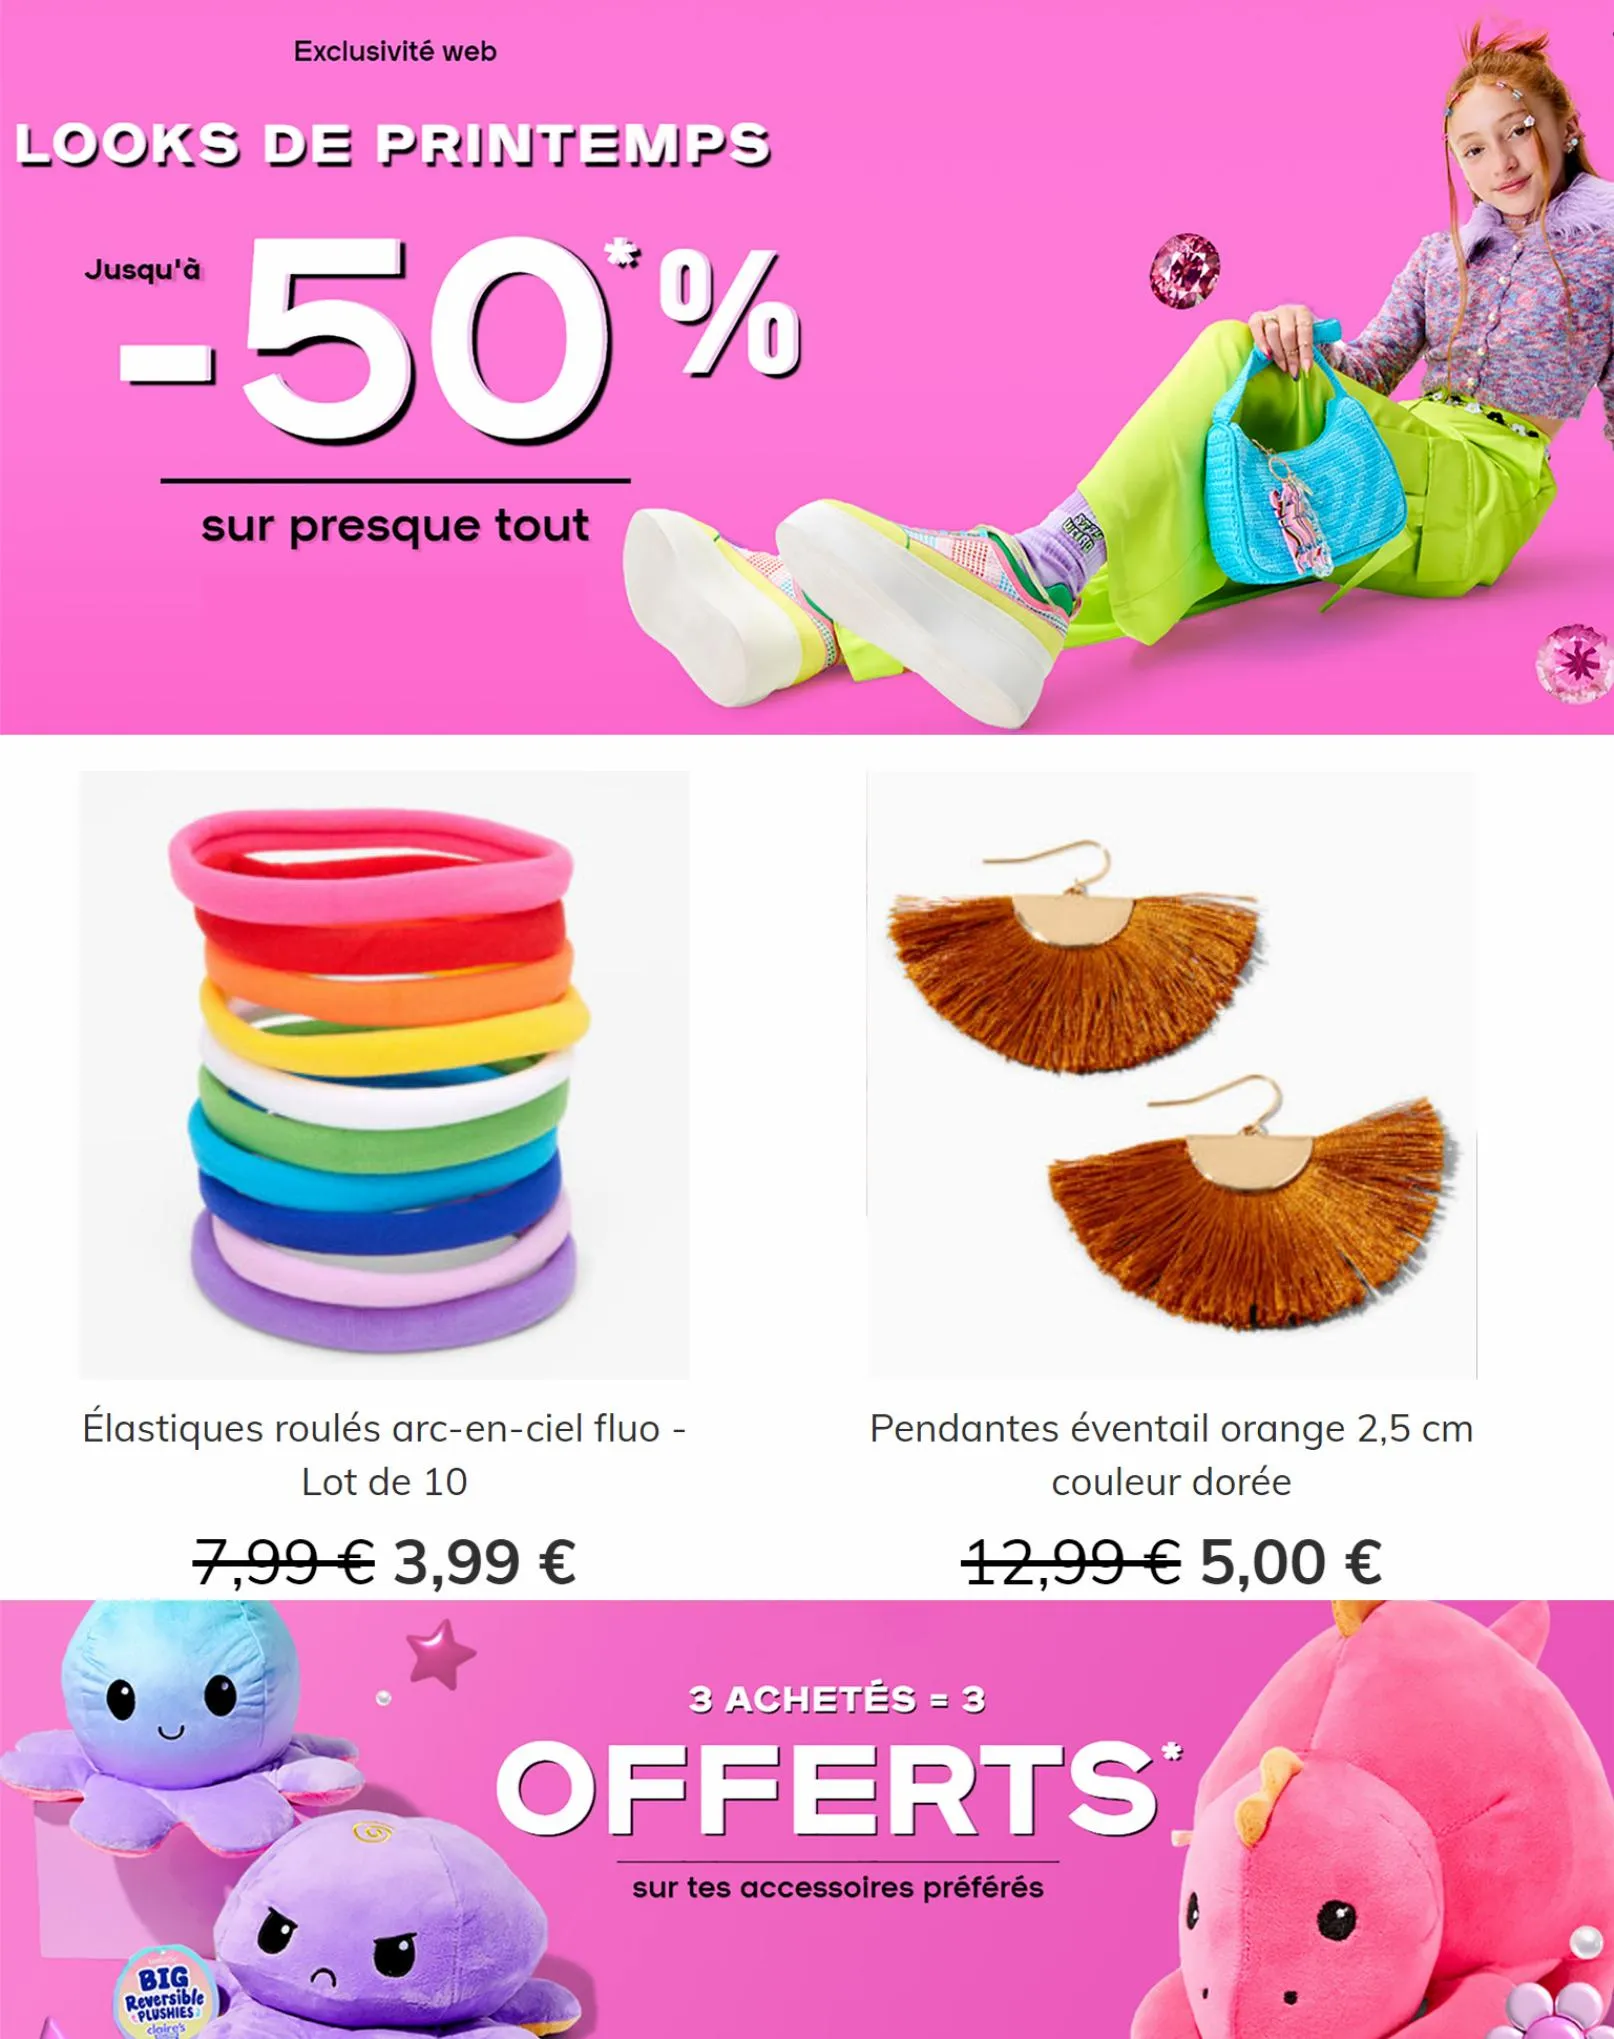 Catalogue Offres Speciales -50%!, page 00002